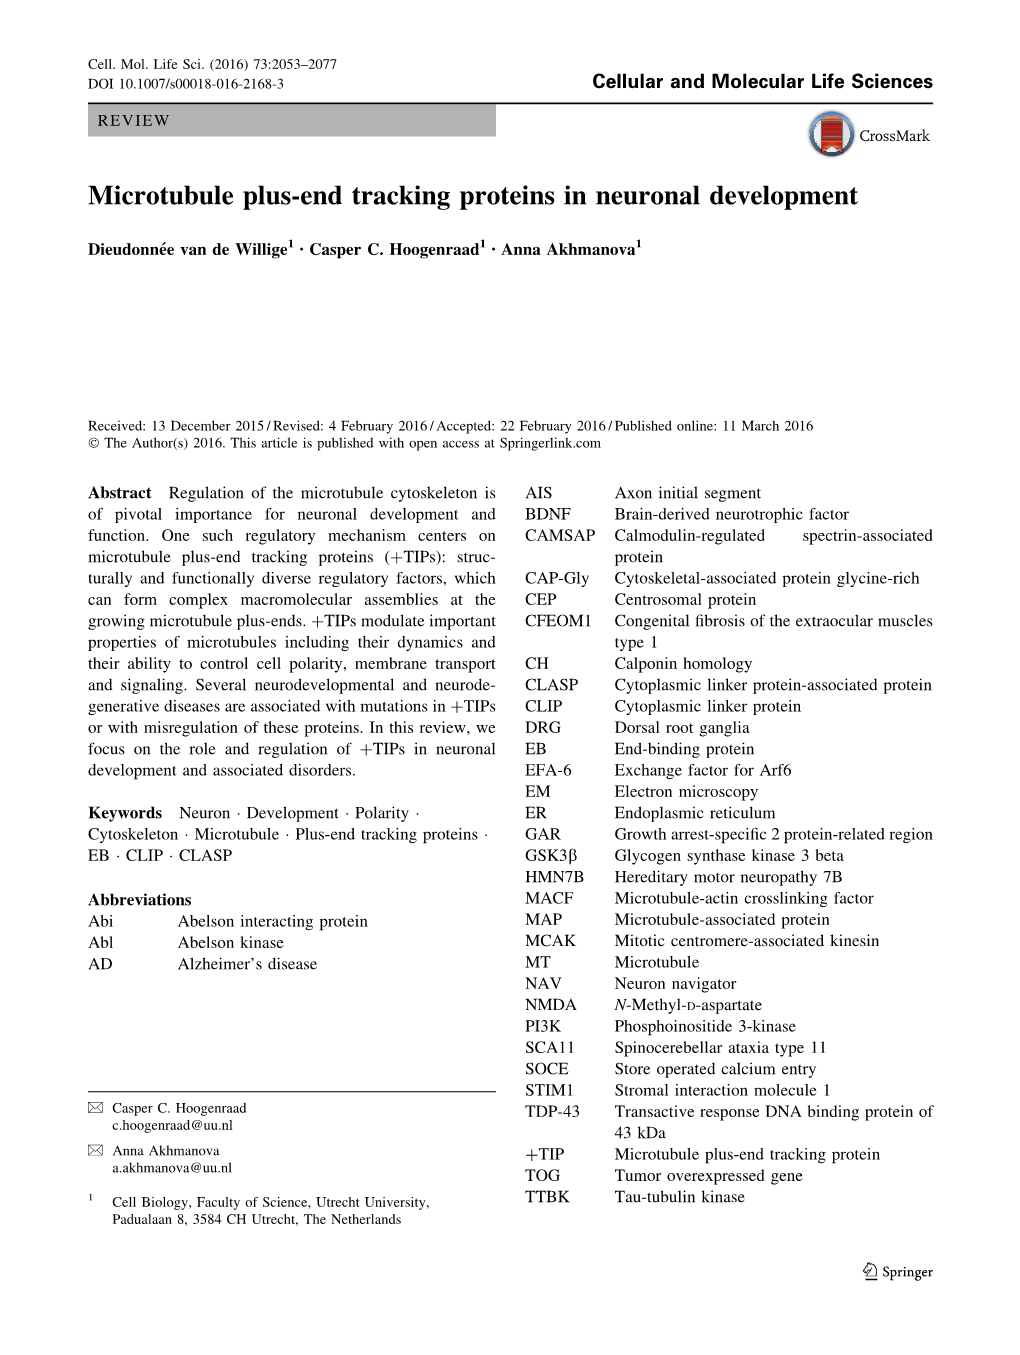 Microtubule Plus-End Tracking Proteins in Neuronal Development